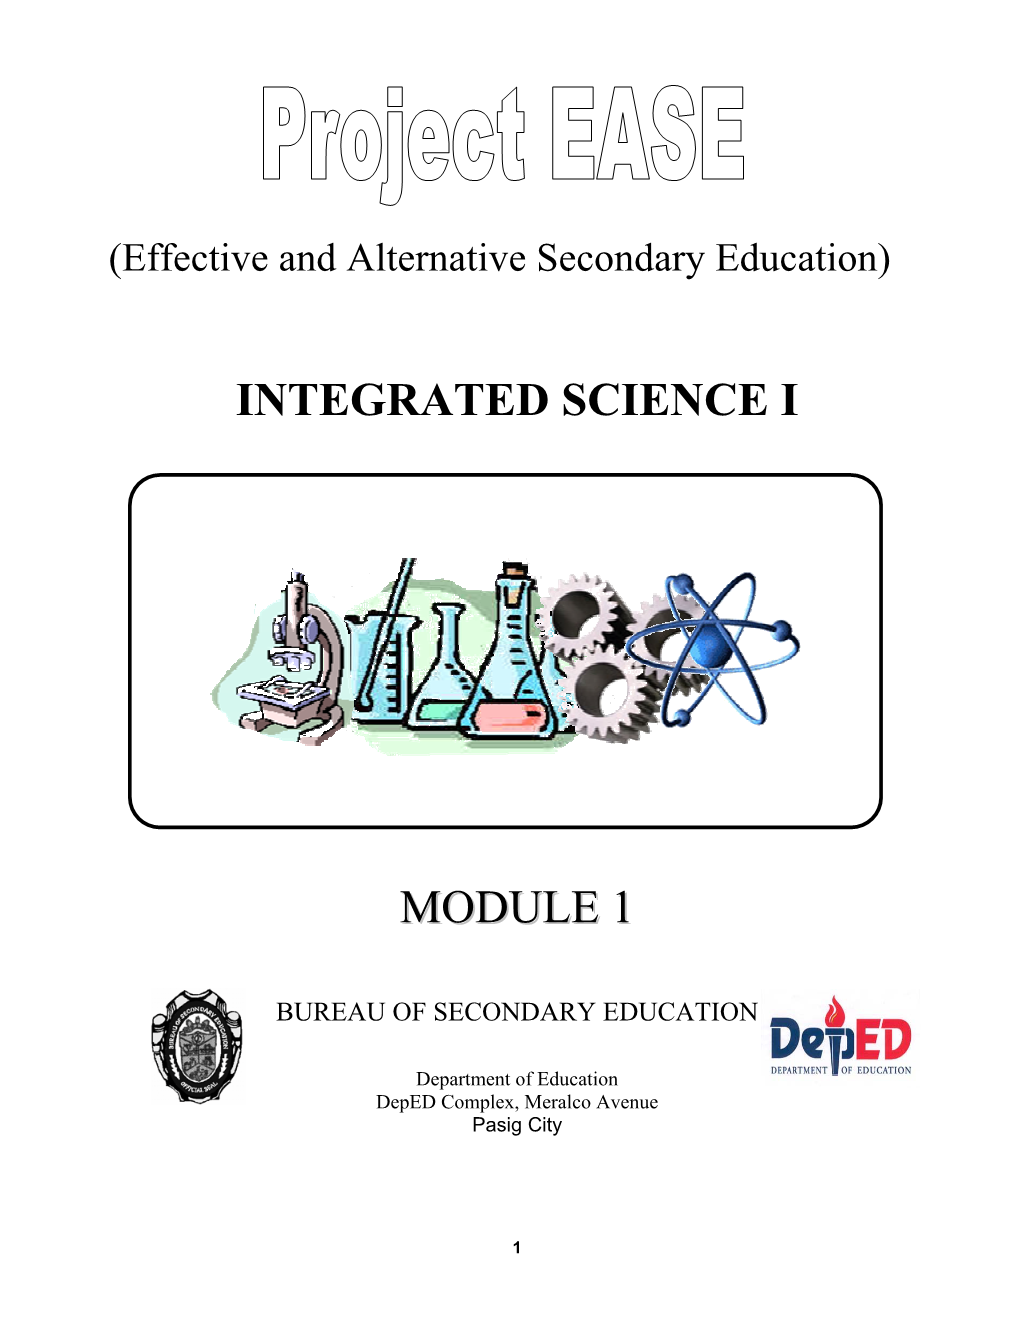 Integrated Science I Module 1